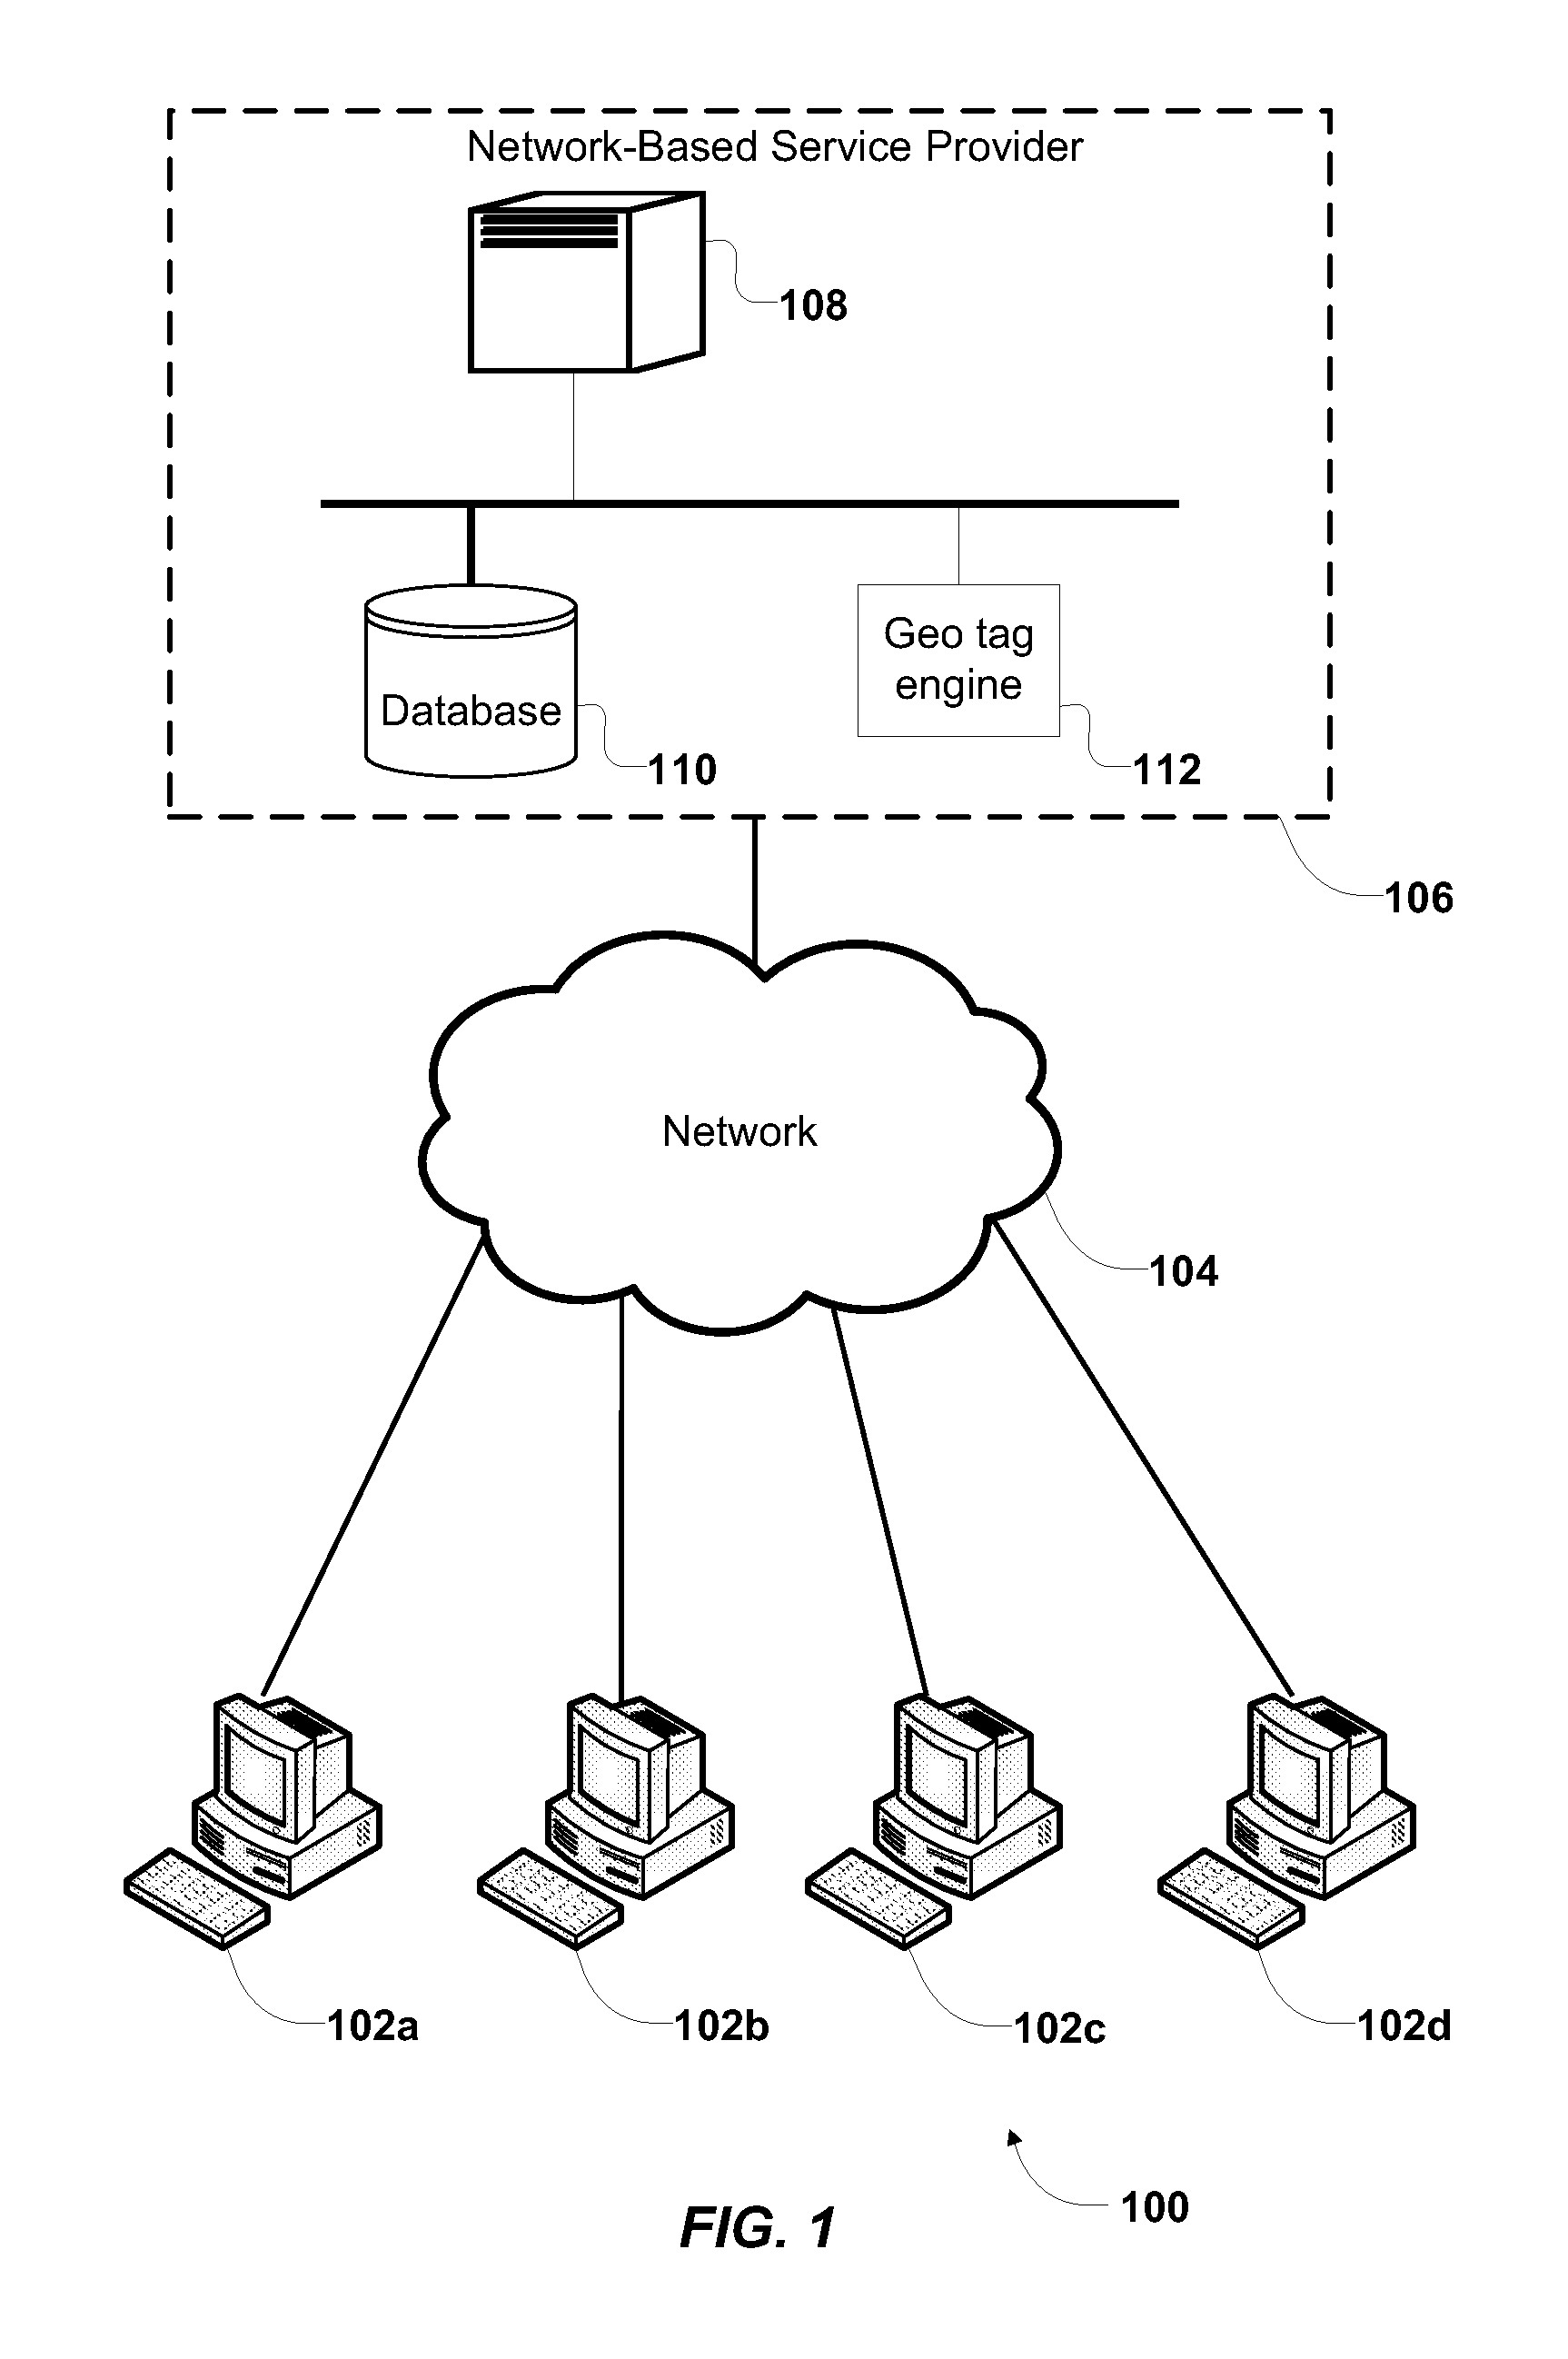 Method and interface for displaying locations associated with annotations